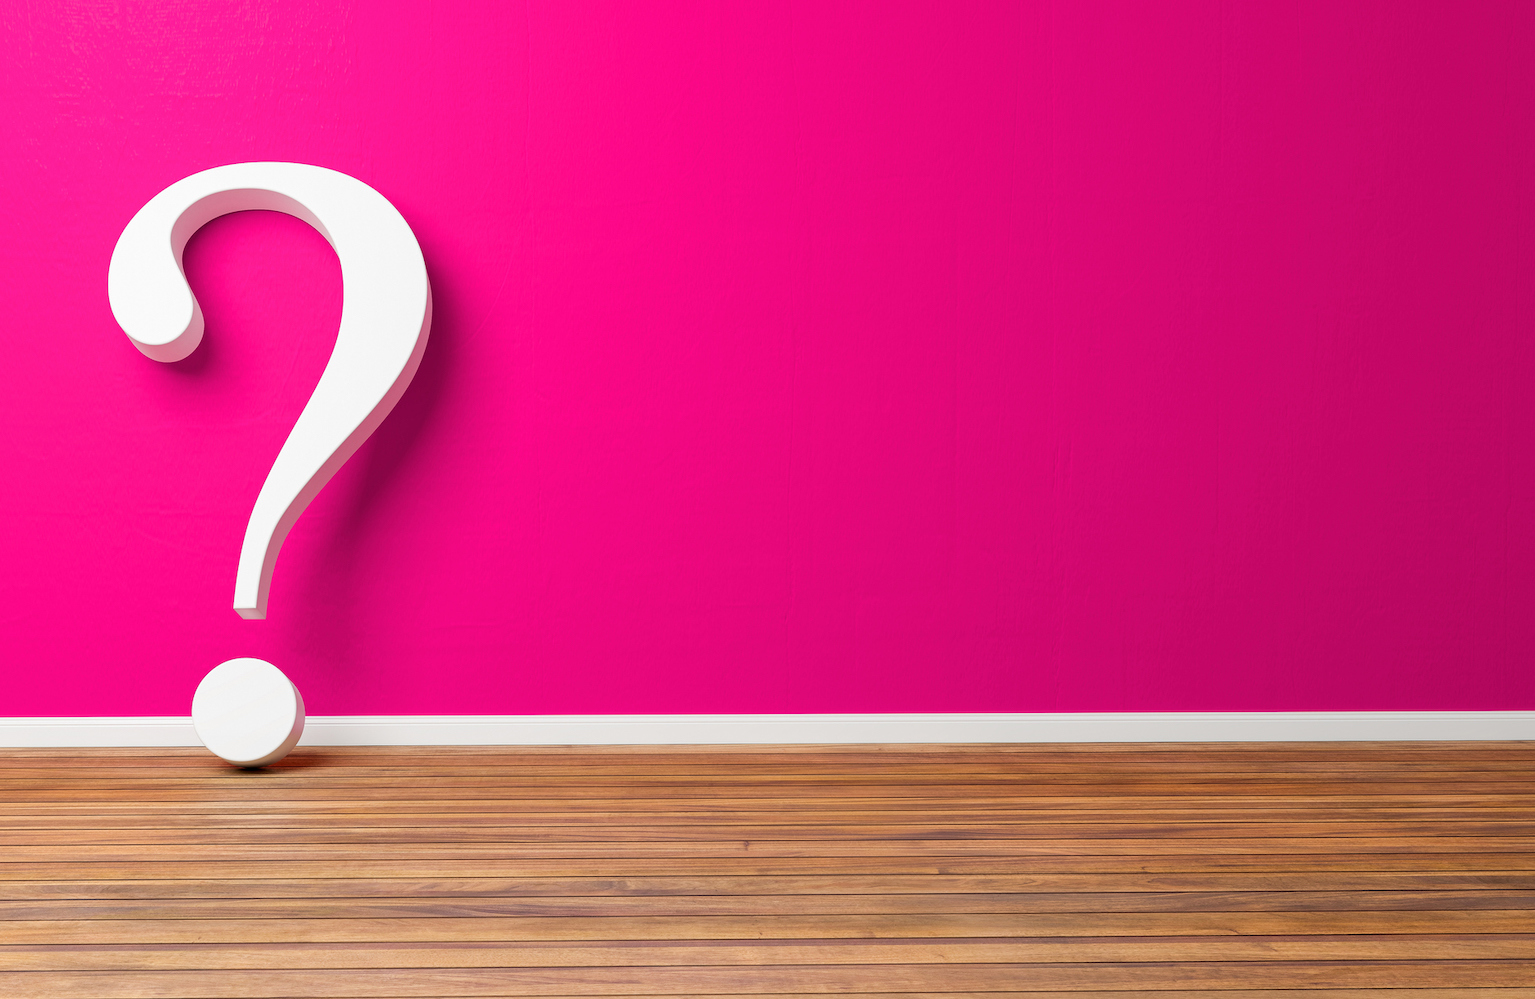 White question mark on pink concrete grunge wall - 3D illustration